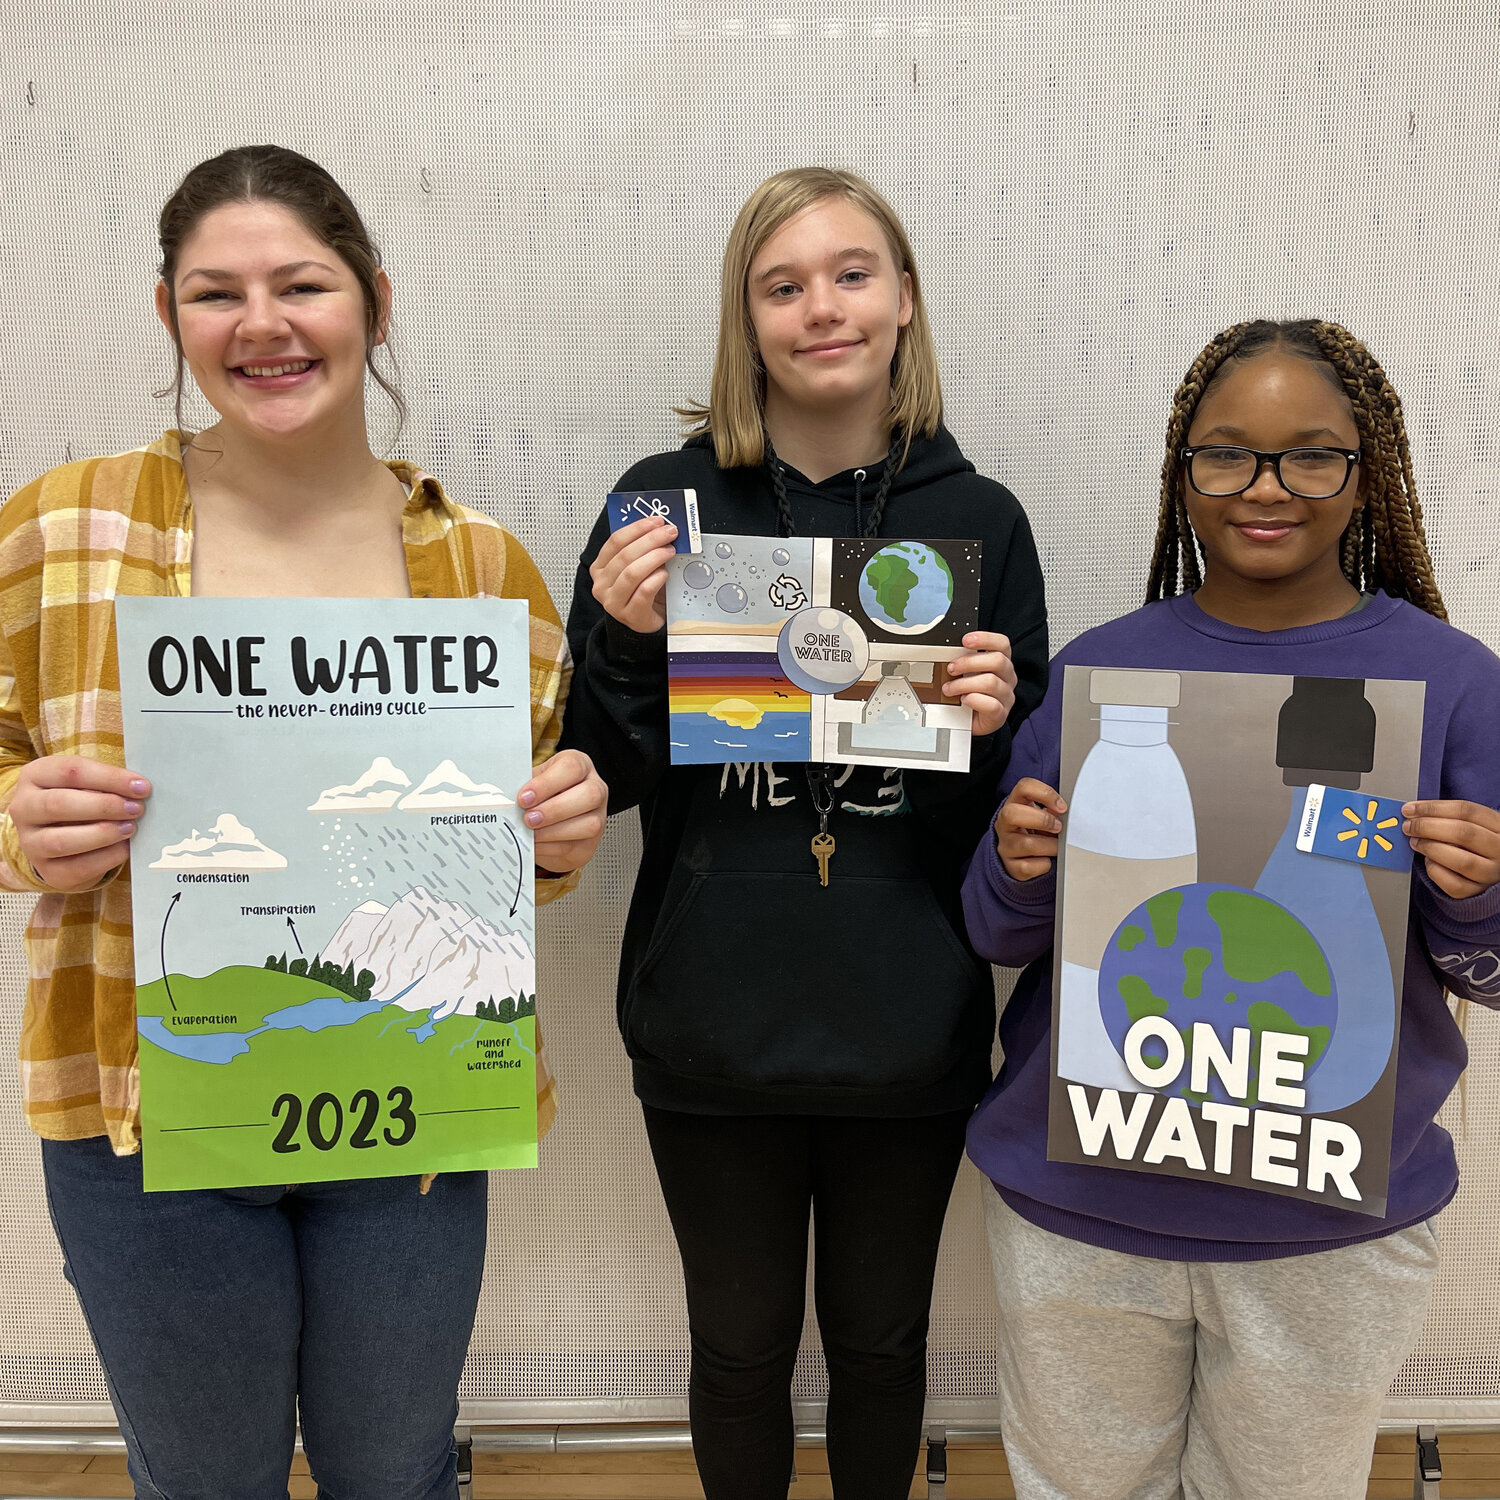 Sussex Technical High School digital publishing students swept the 10-12 digital category of the 2023 Conservation Poster Contest, from left, Rebekah Cullen, first place, Kira Dahl, second place, and Kimaru Weston, third place.